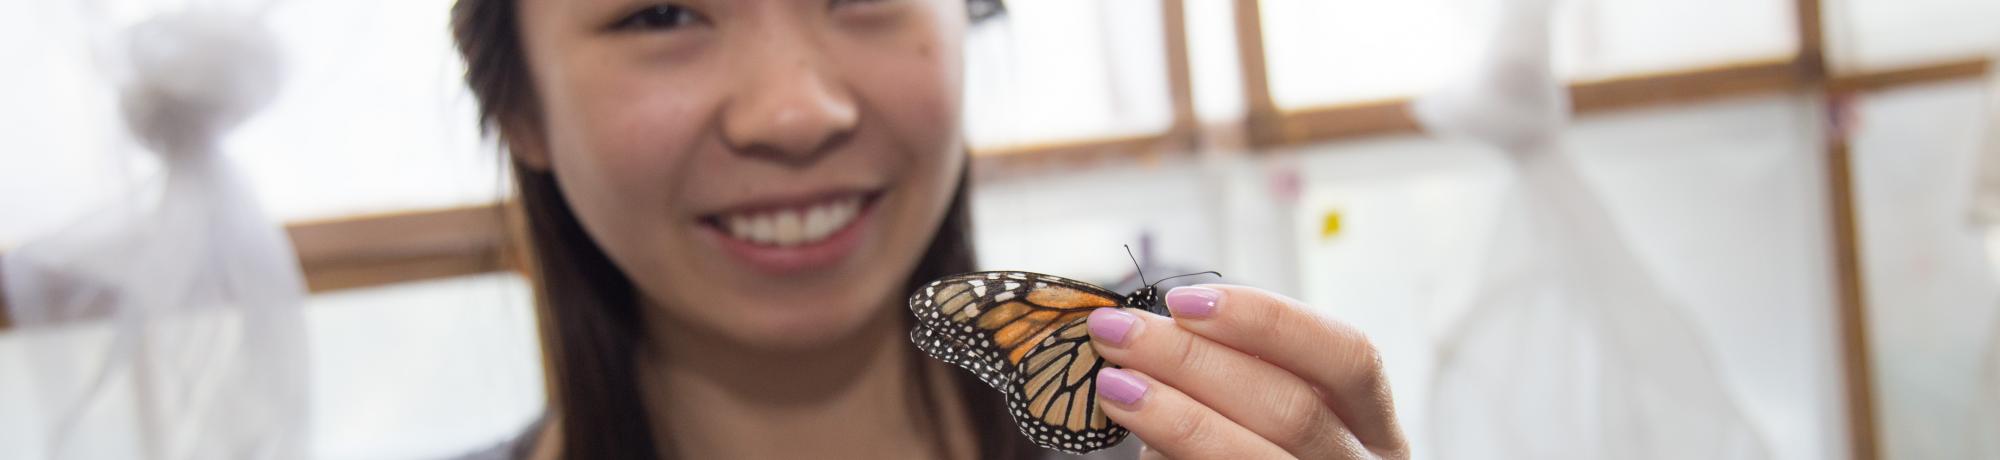 Student holding butterfly between fingers